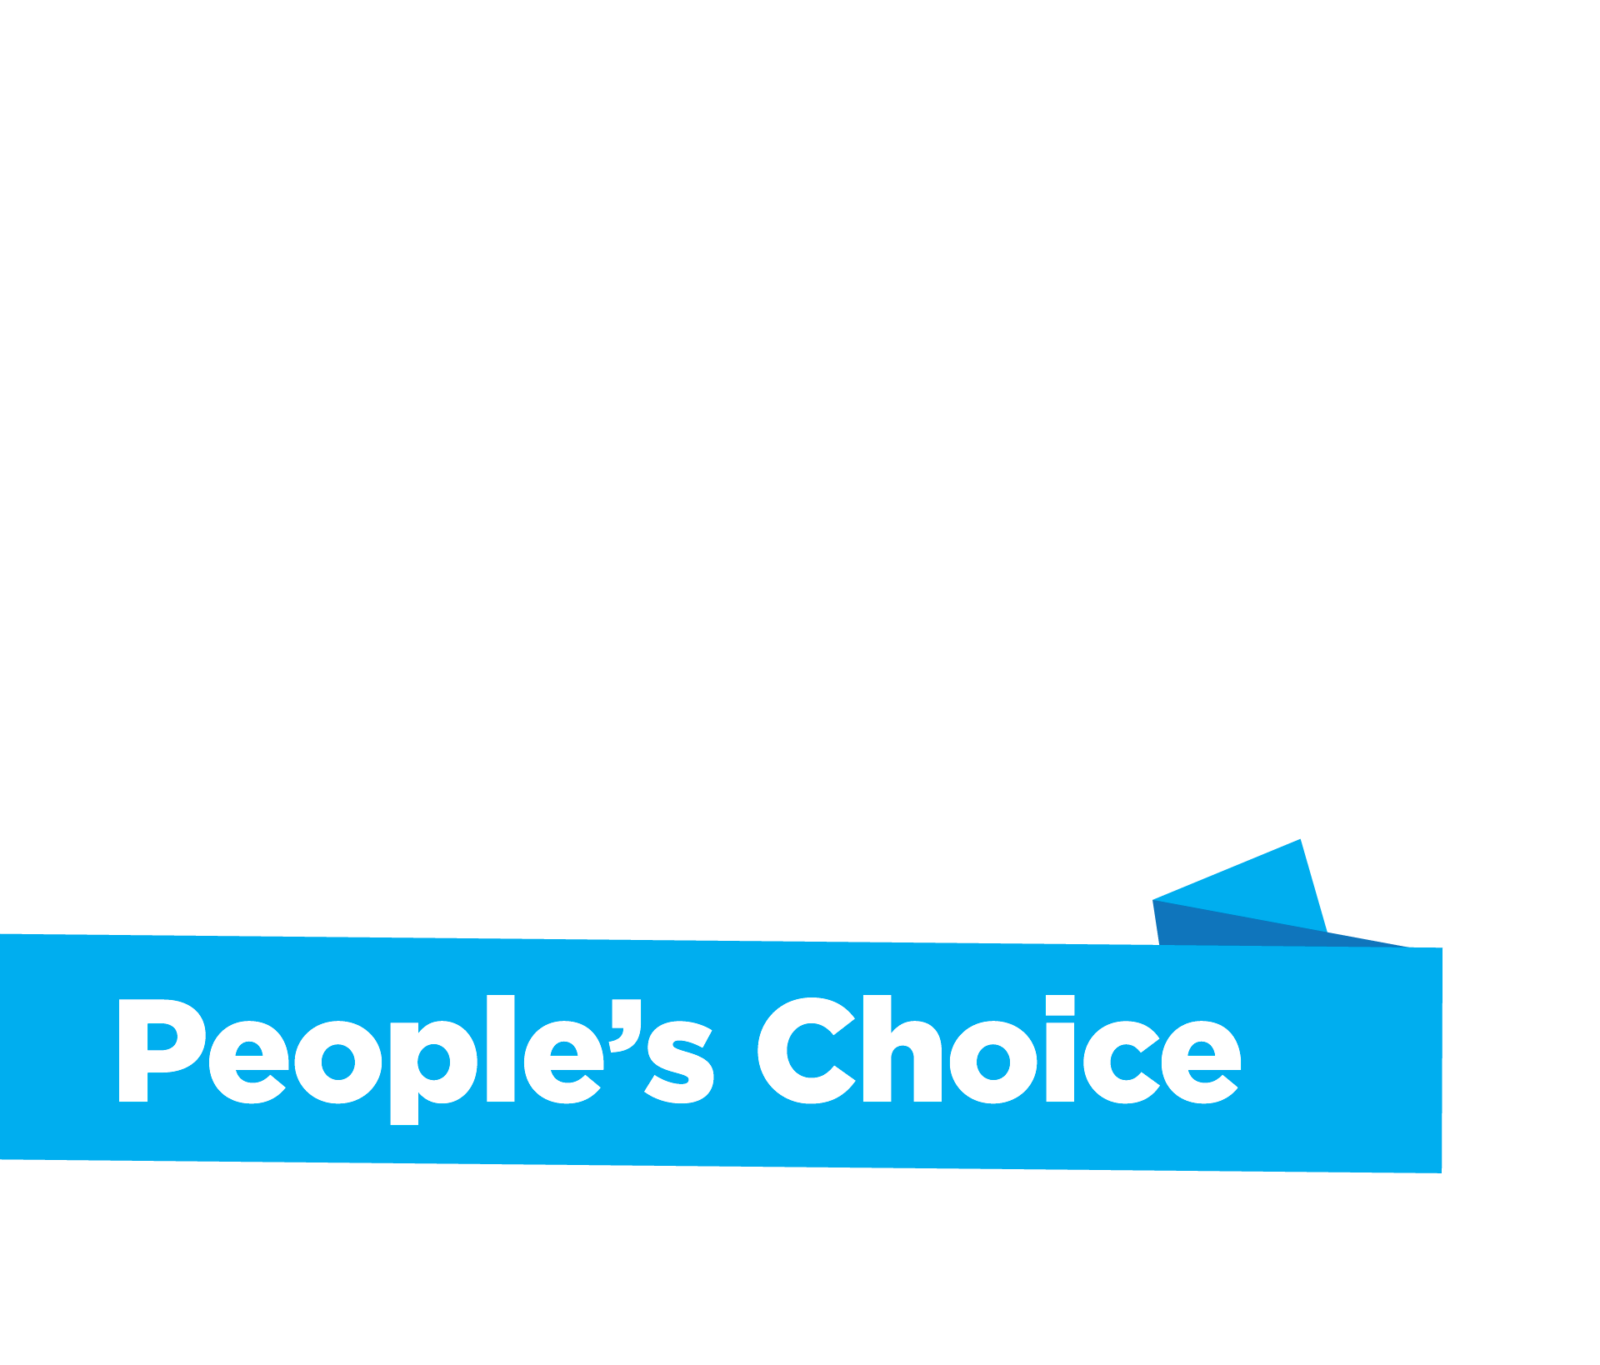 Best DFW peoples Choice - The Dallas Morning News